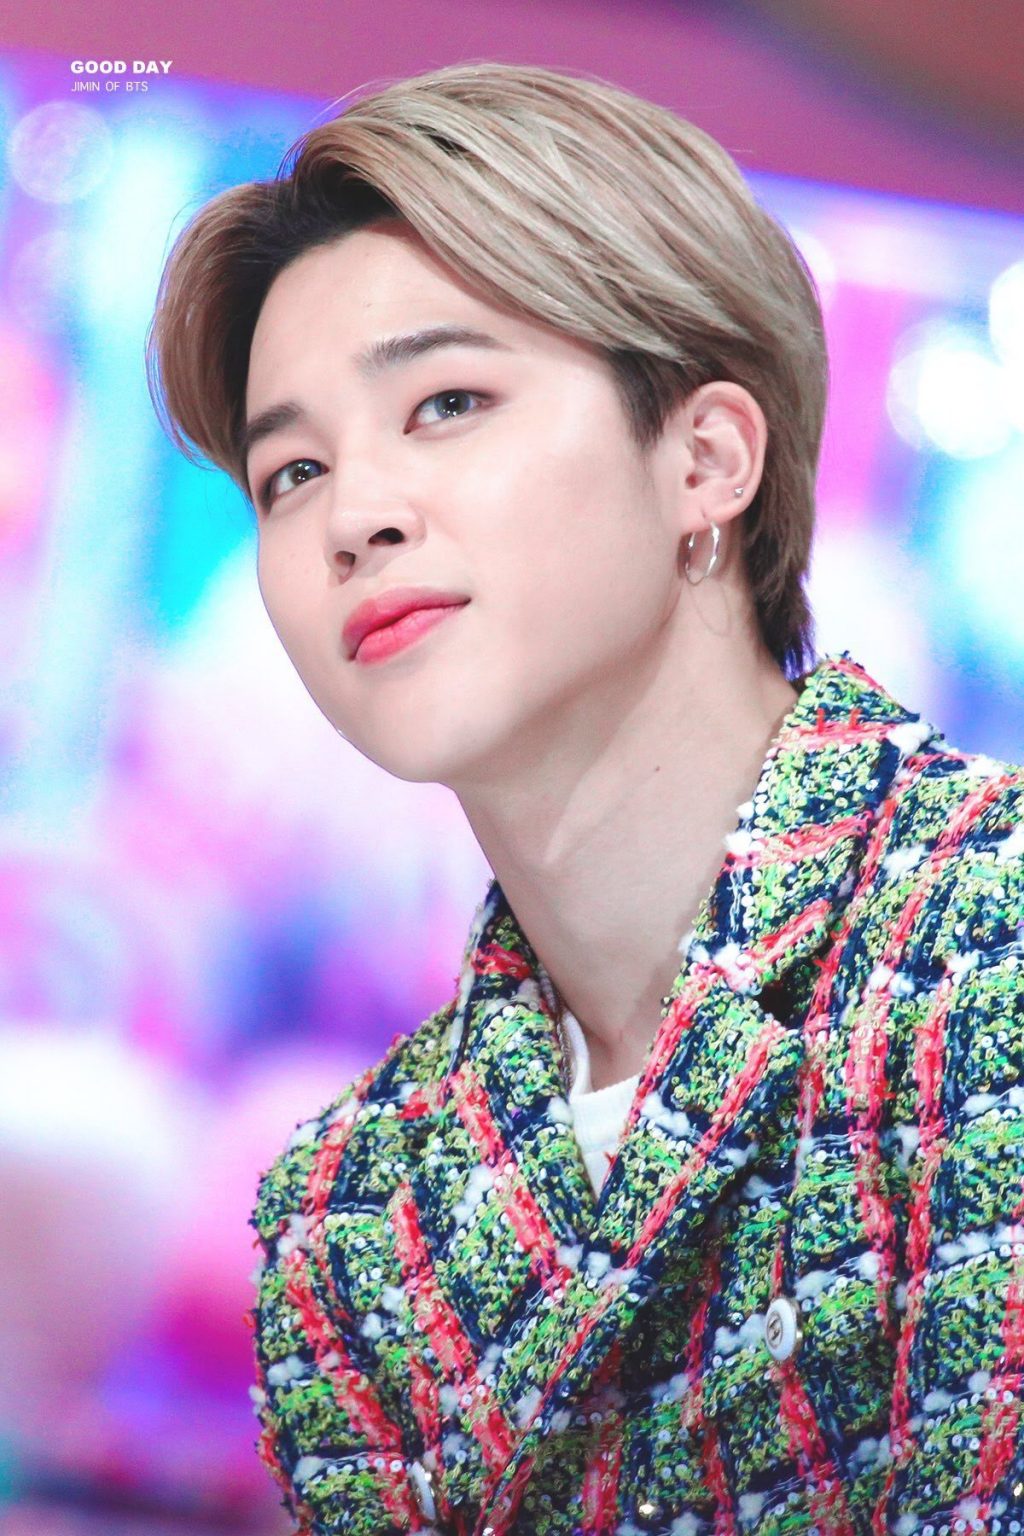 BTS Jimin’s Best Glow Up: From Self-Criticism To Self-Love – K-Luv